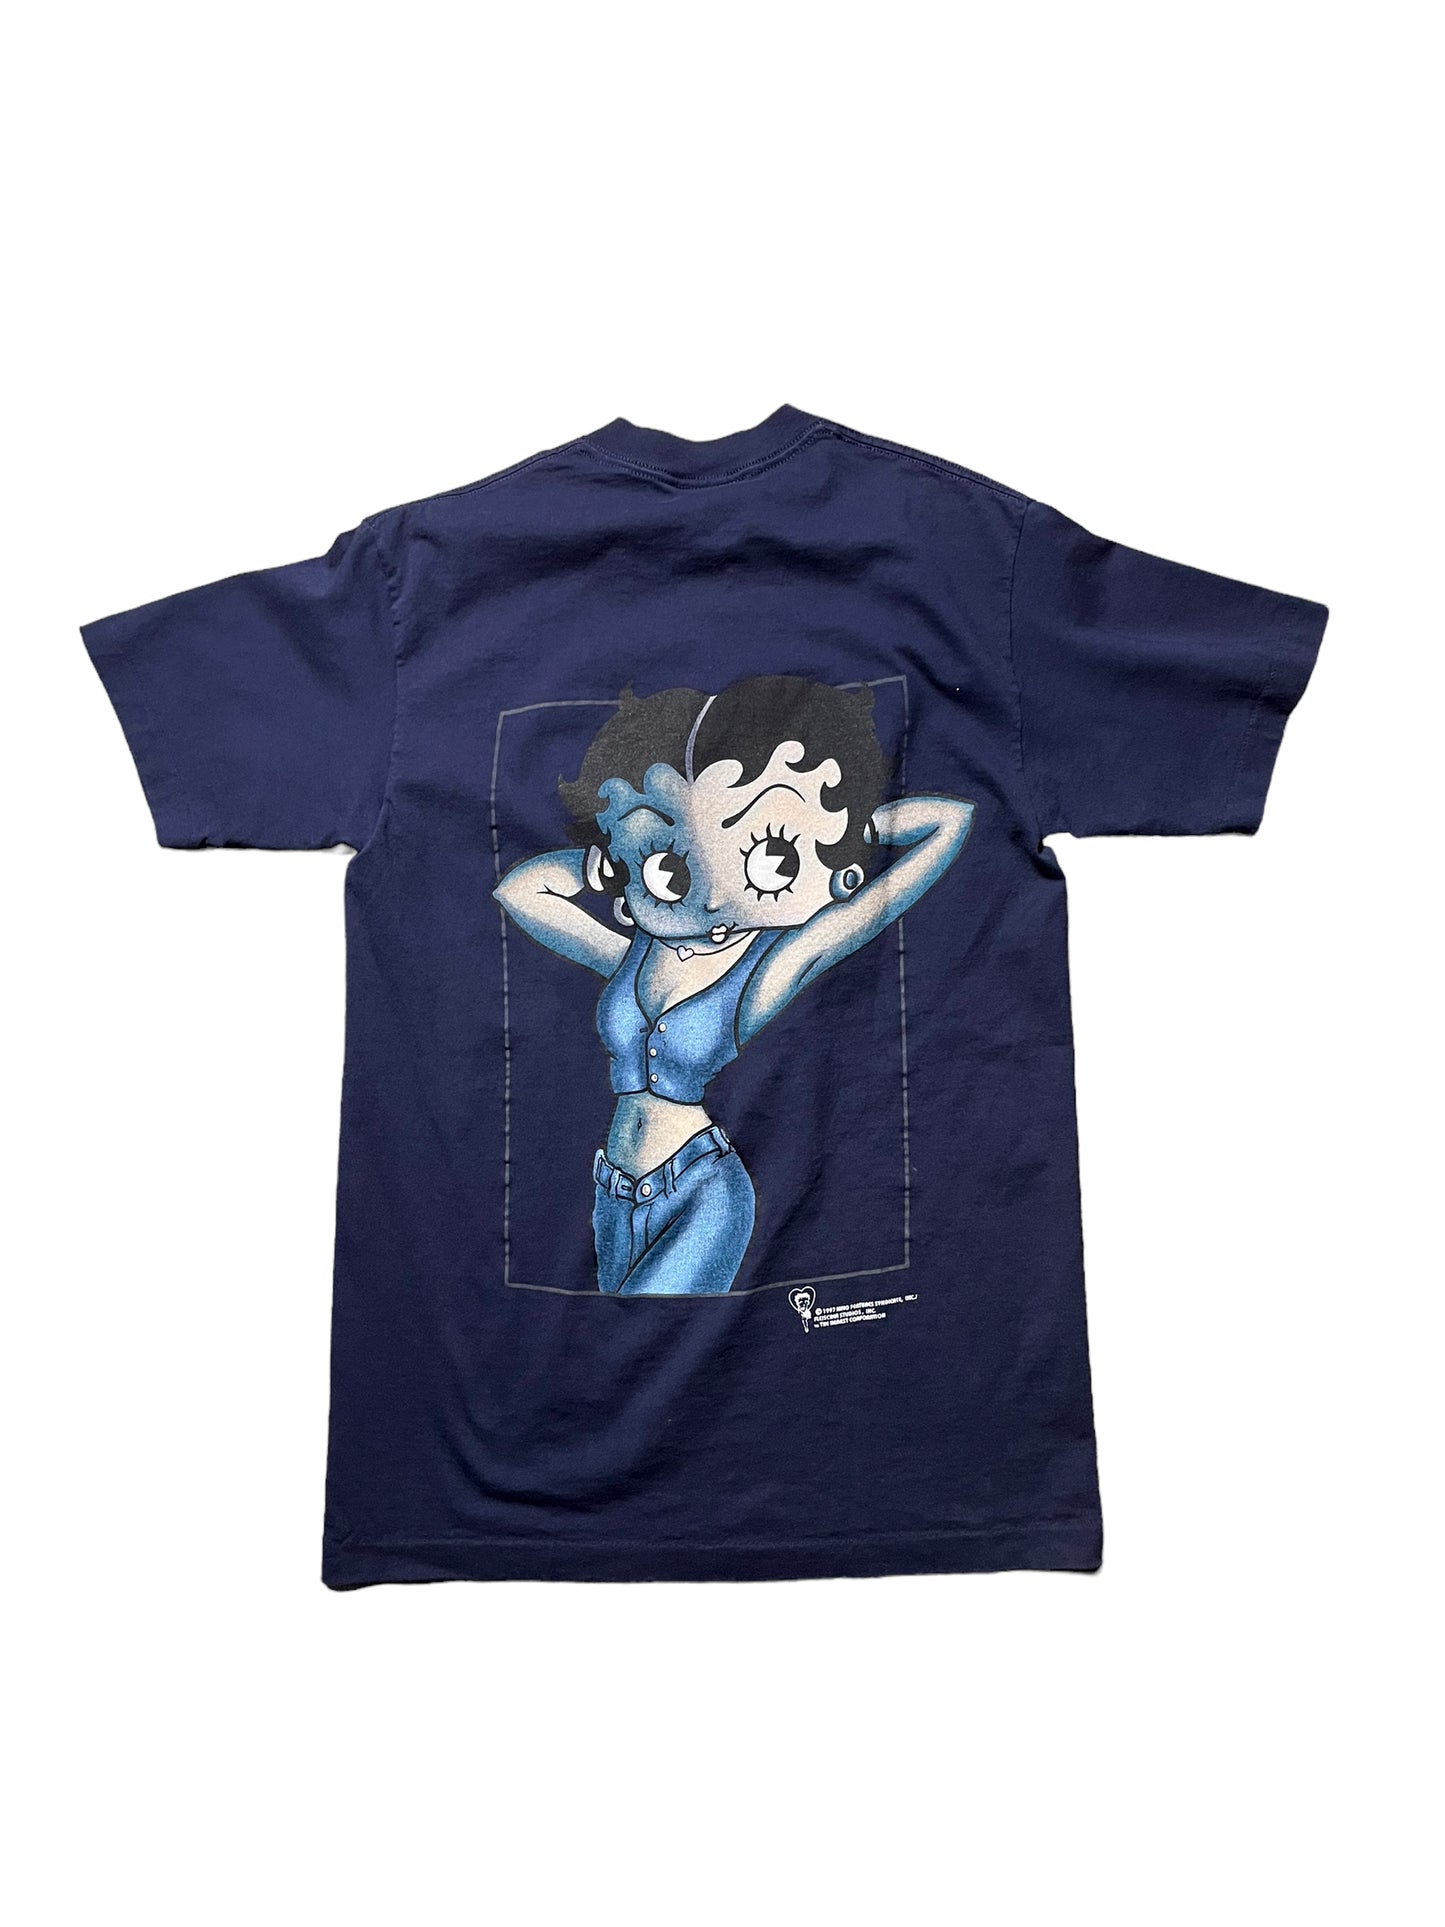 (M) 1997 Betty Boop Wear Tommy Hilfiger Style Double Sided Tee